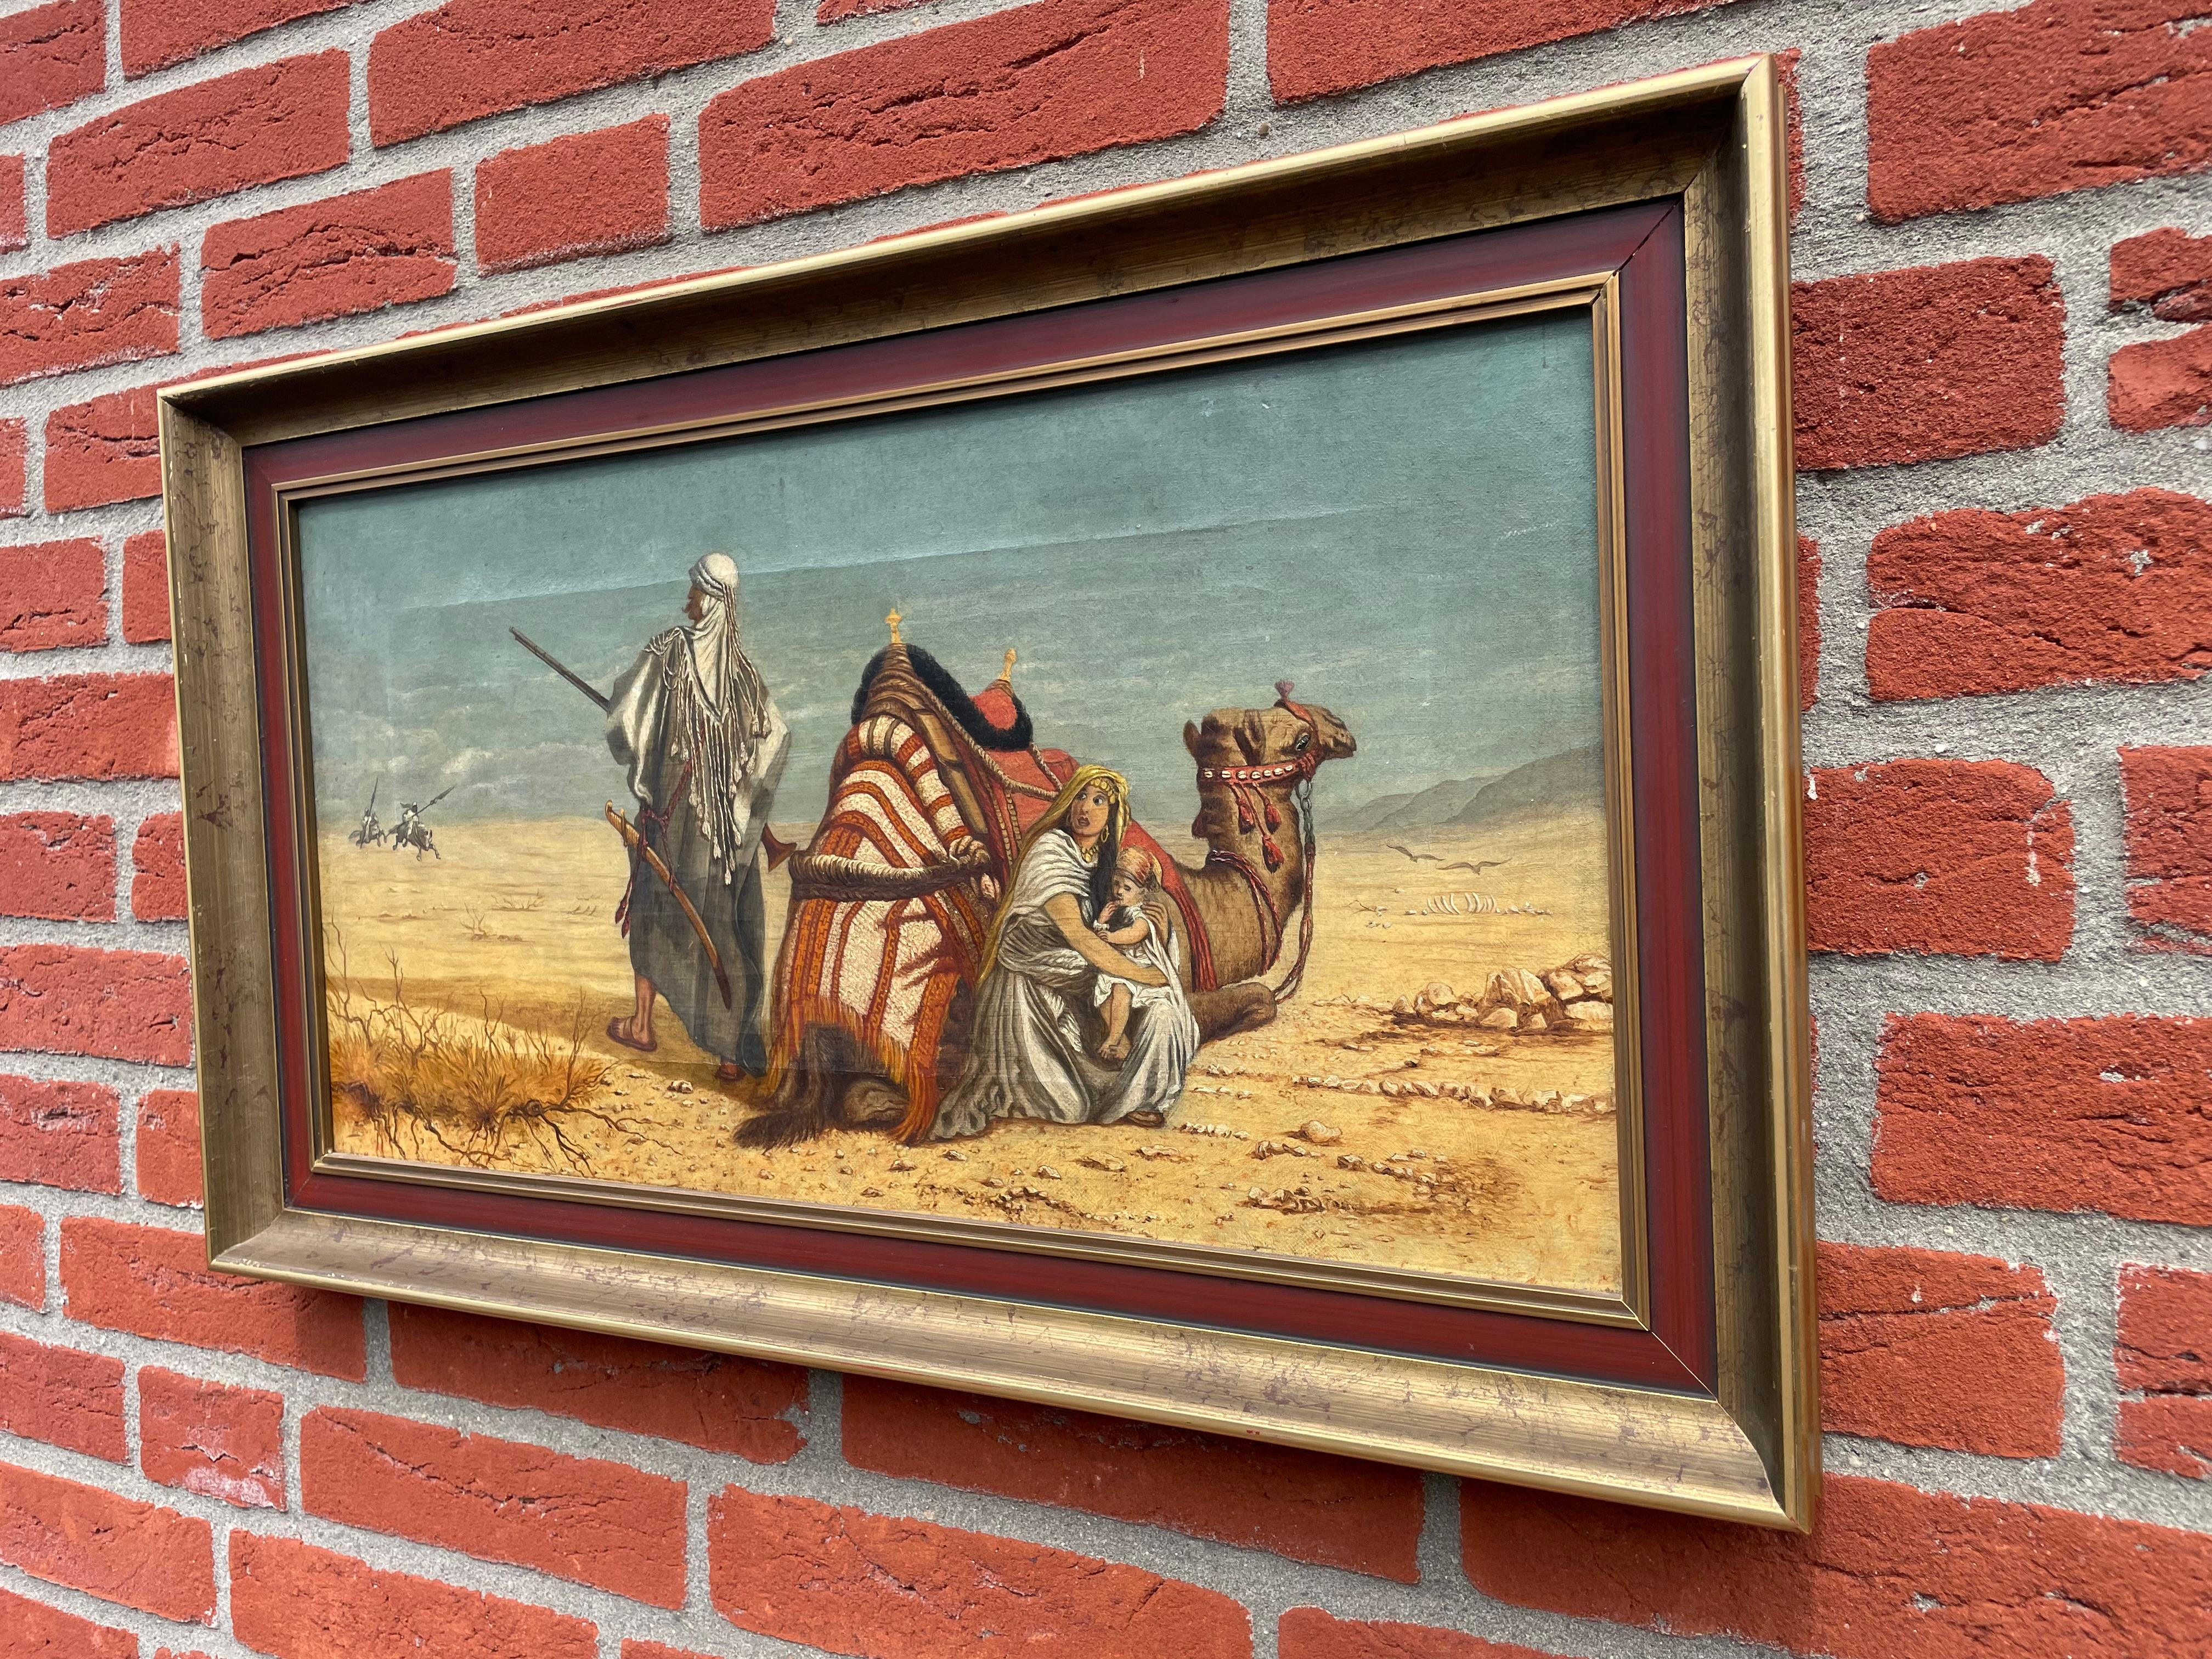 19th century, one of a kind, oil painting in a more modern, golden colored wooden frame.

We know that in the 19th century many renowned European artists went on 'study trips' to all parts of the globe and many of them loved the totally different